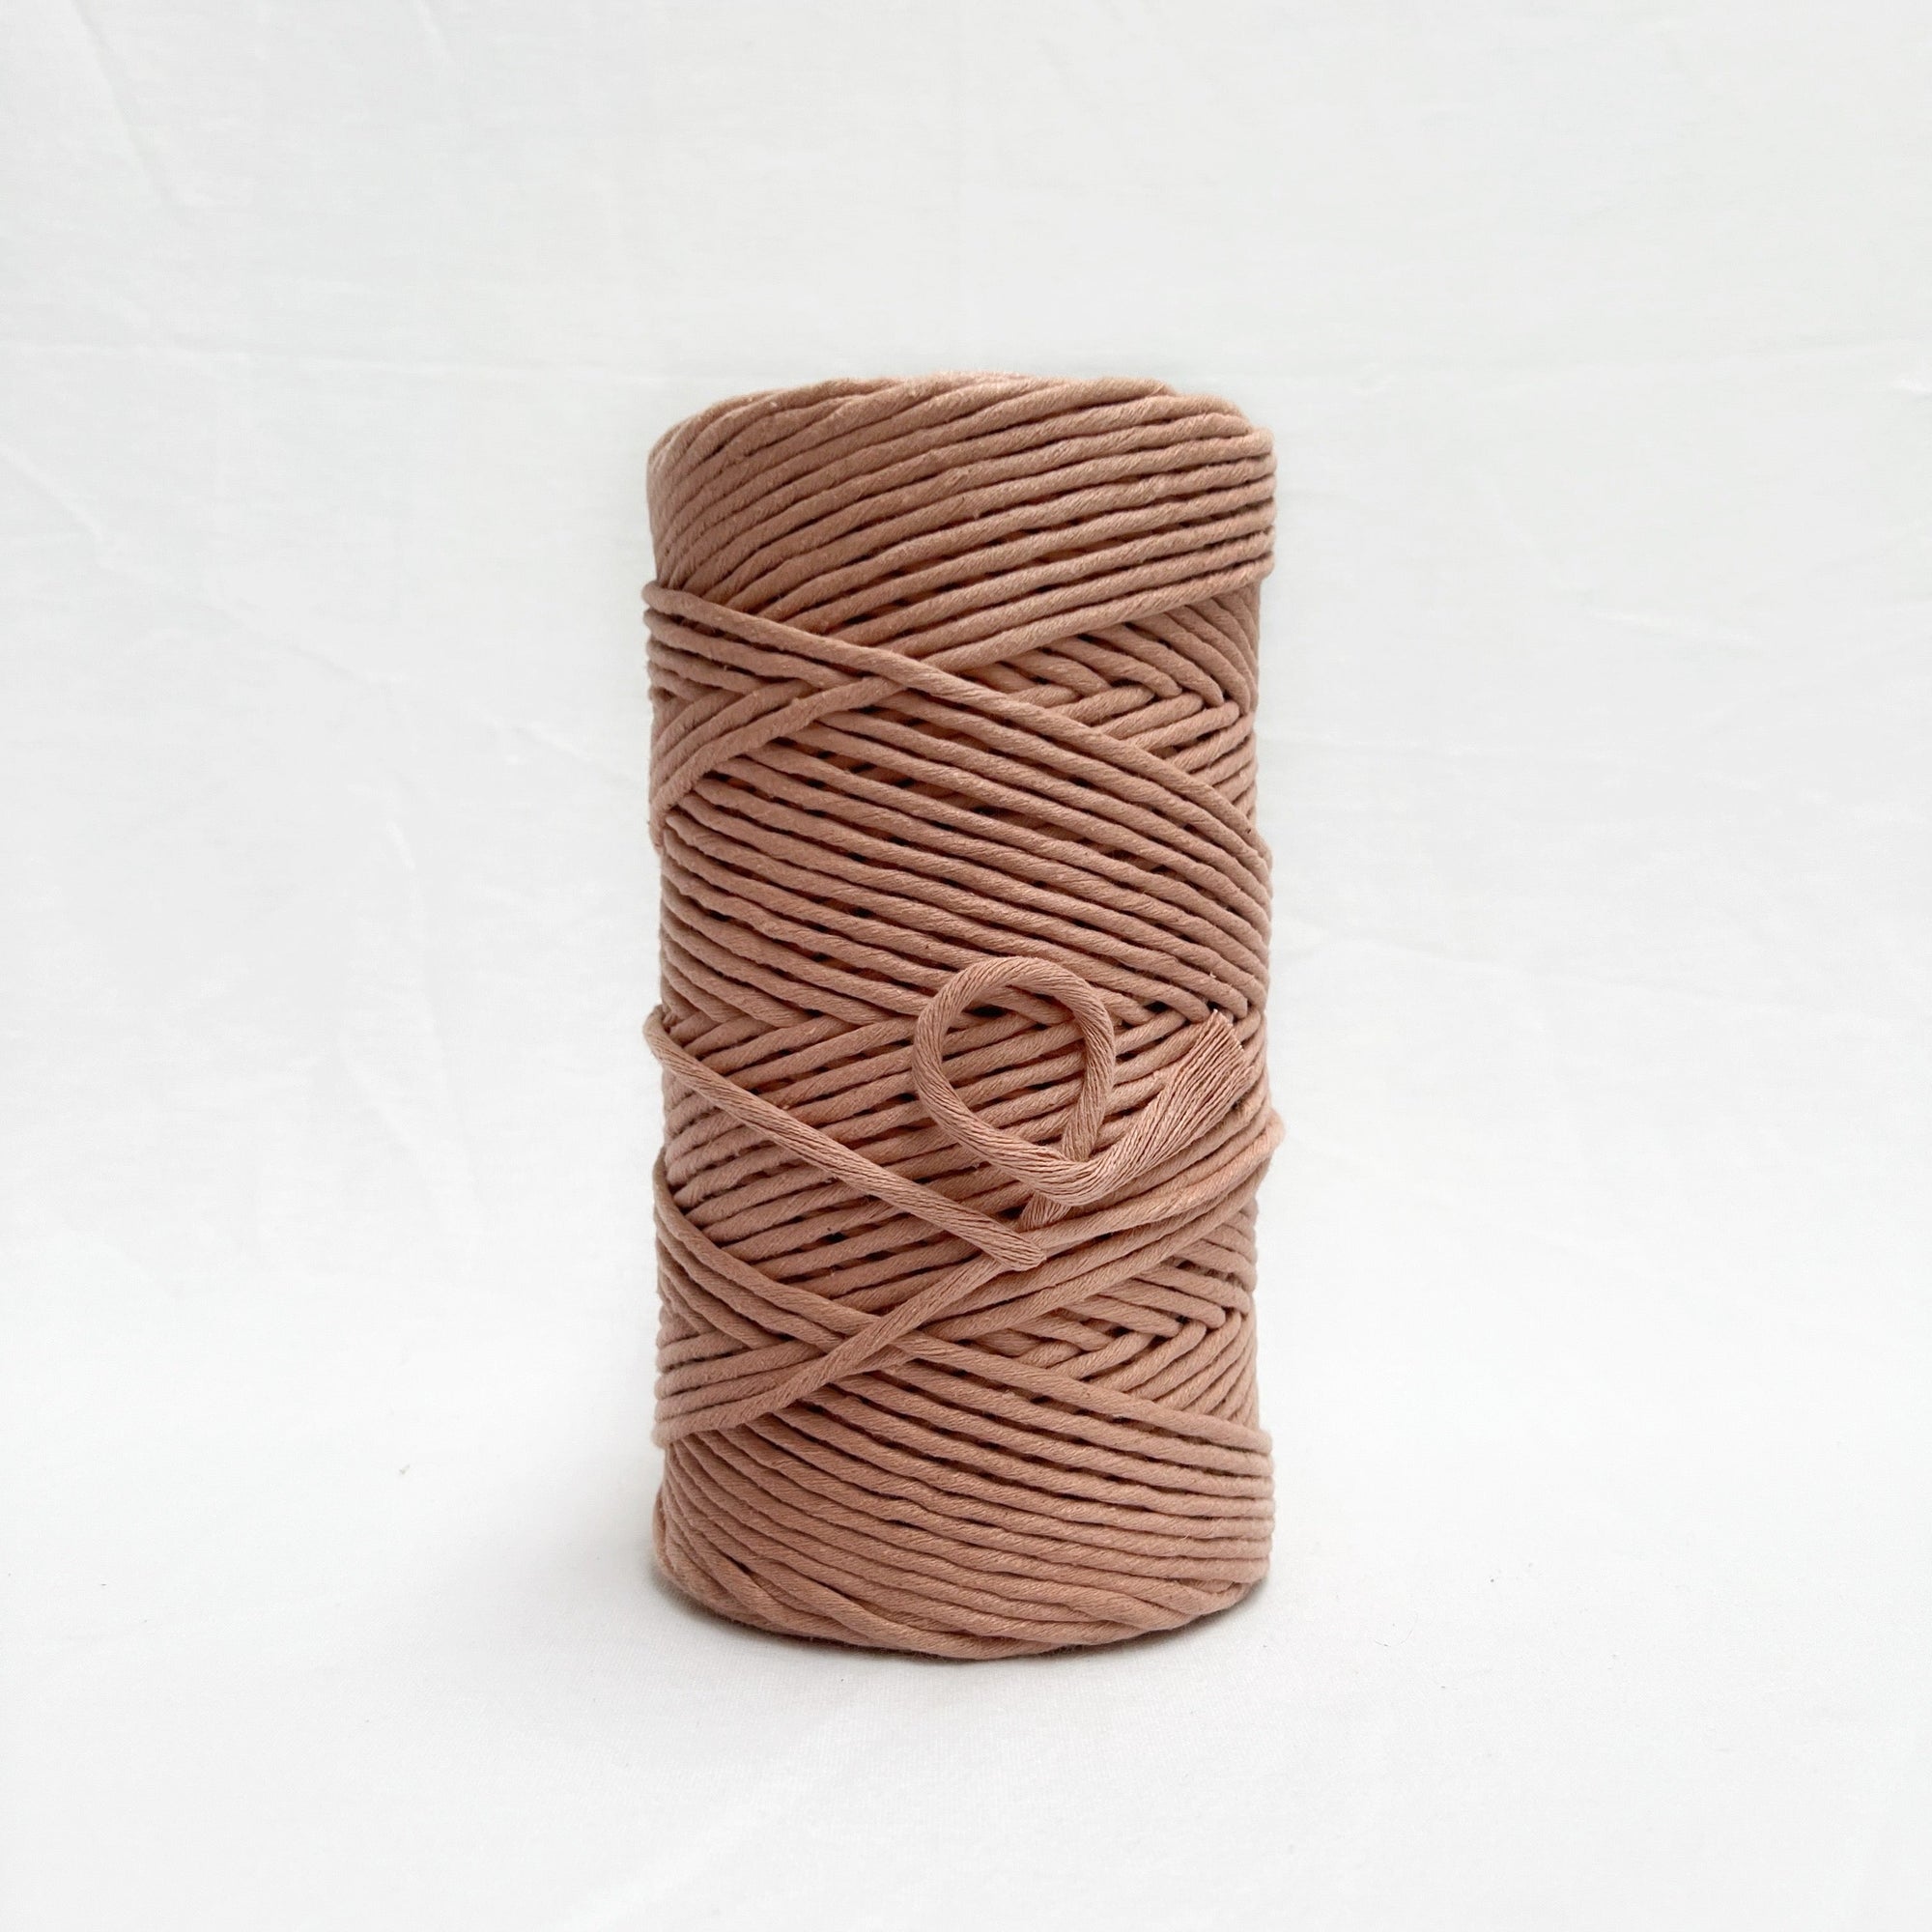 Mary Maker Studio Luxe Colour Cotton 5mm 1KG Recycled Luxe Macrame String // Vintage Peach macrame cotton macrame rope macrame workshop macrame patterns macrame